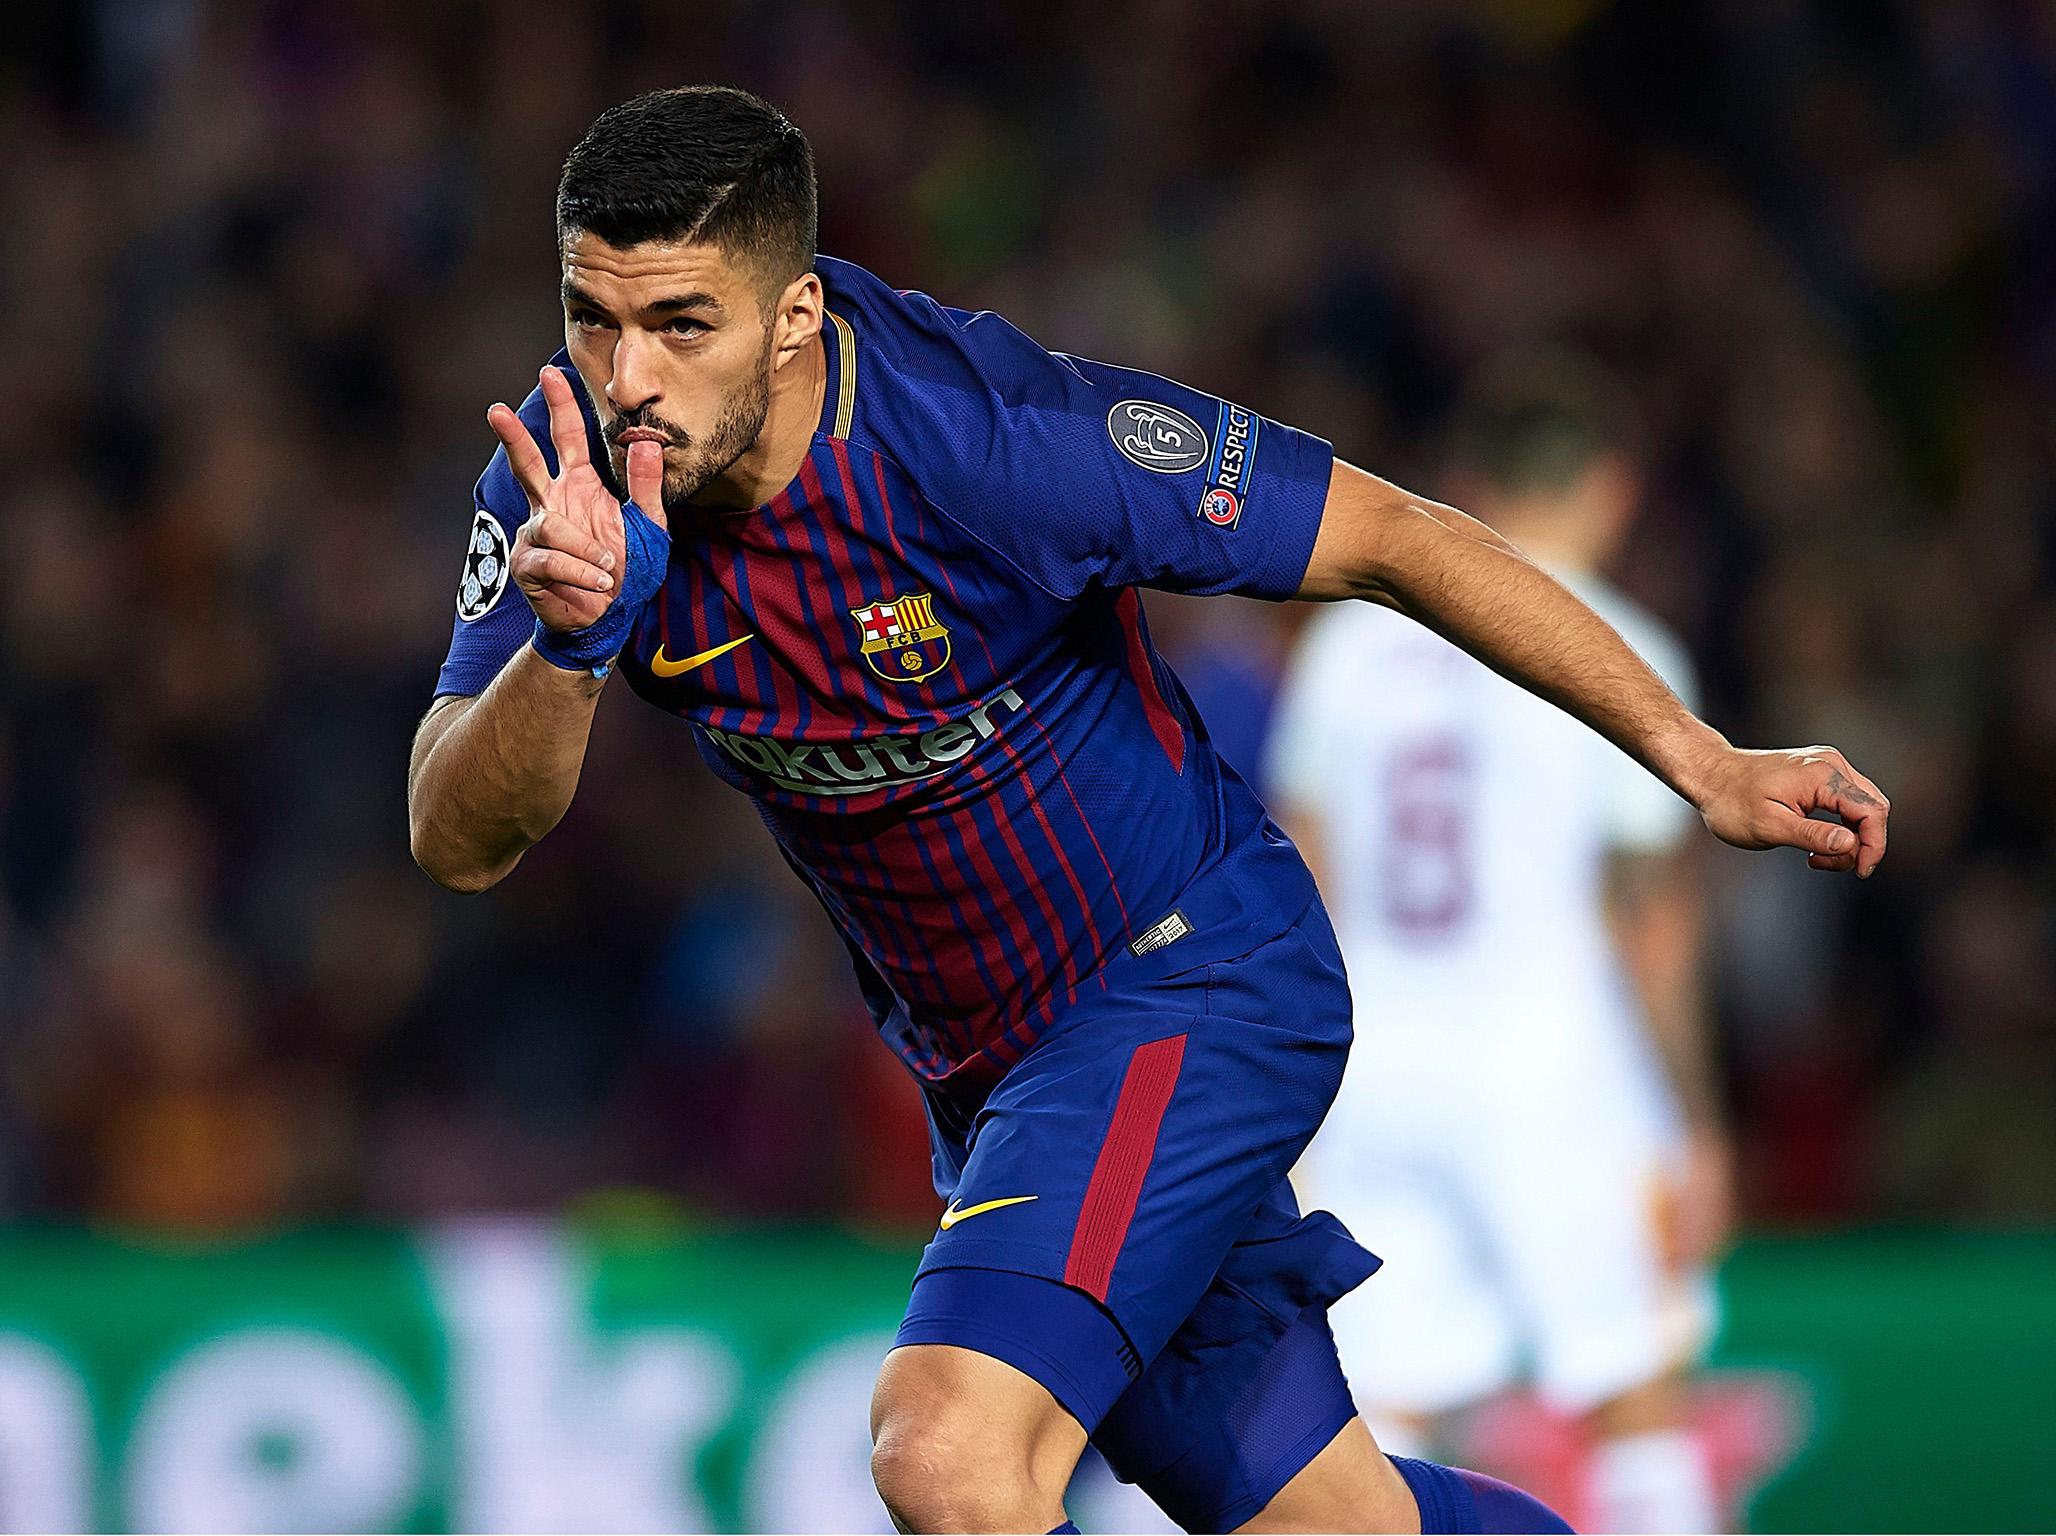 Luis Suarez added Barcelona’s fourth of the night